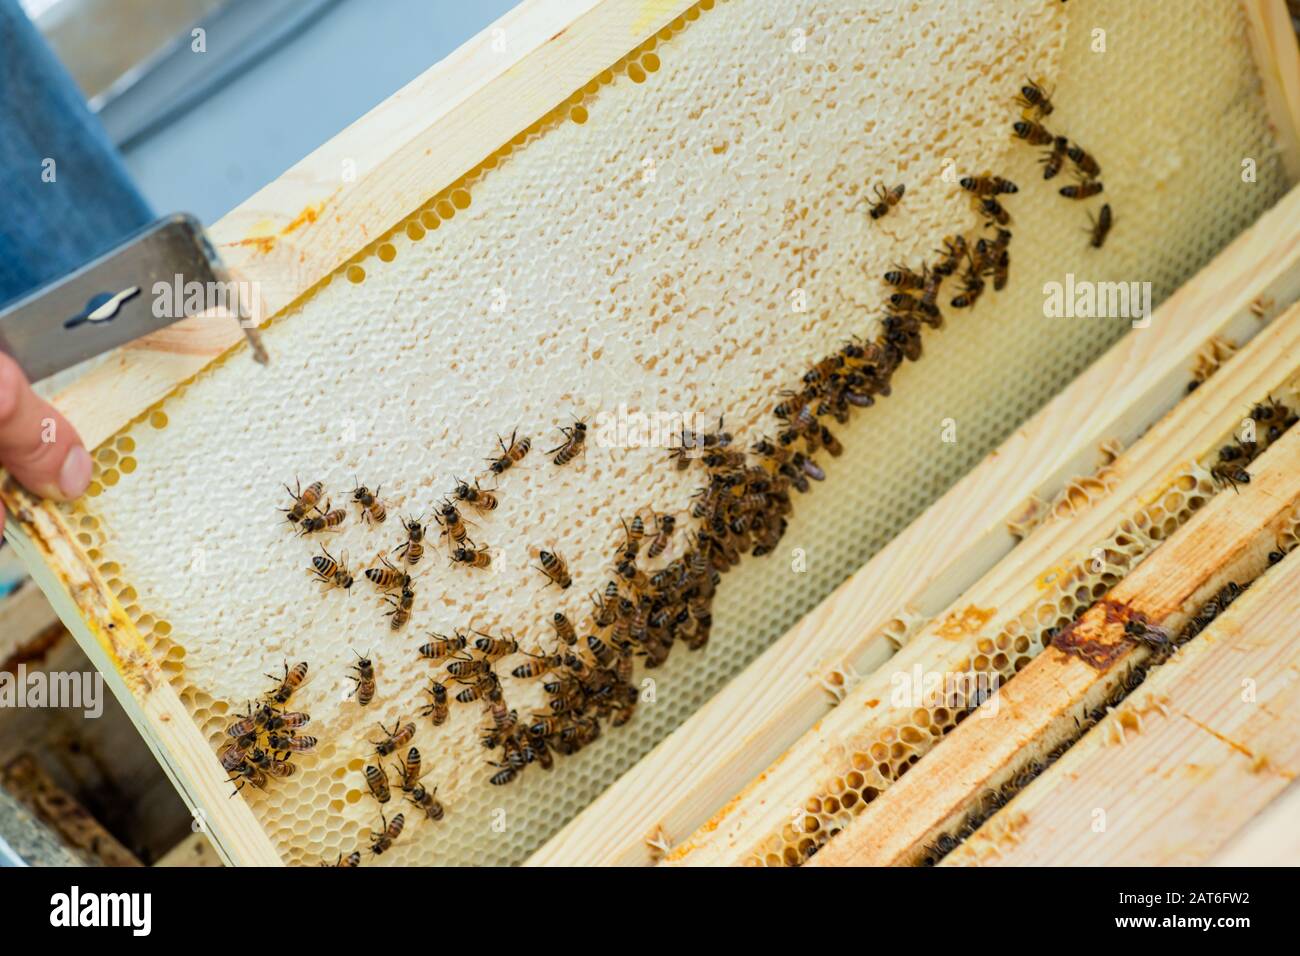 bee on honeycombs with honey slices nectar into cells. beekeeper with hive tool without gloves looks for overwintered queen on combframe with sealed b Stock Photo